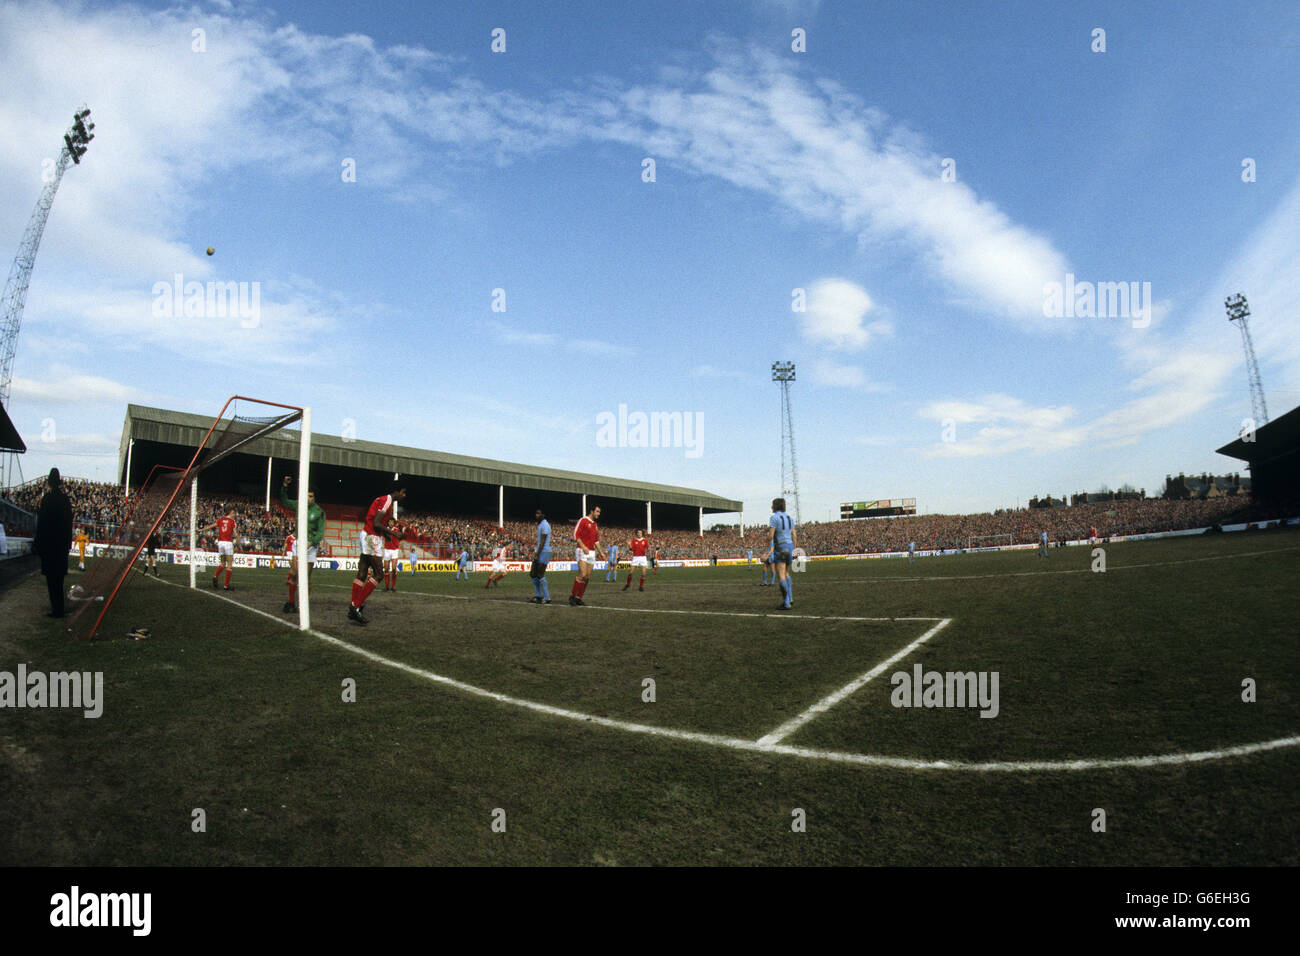 Soccer - League Division One - Nottingham Forest v Coventry City - City Ground Stock Photo